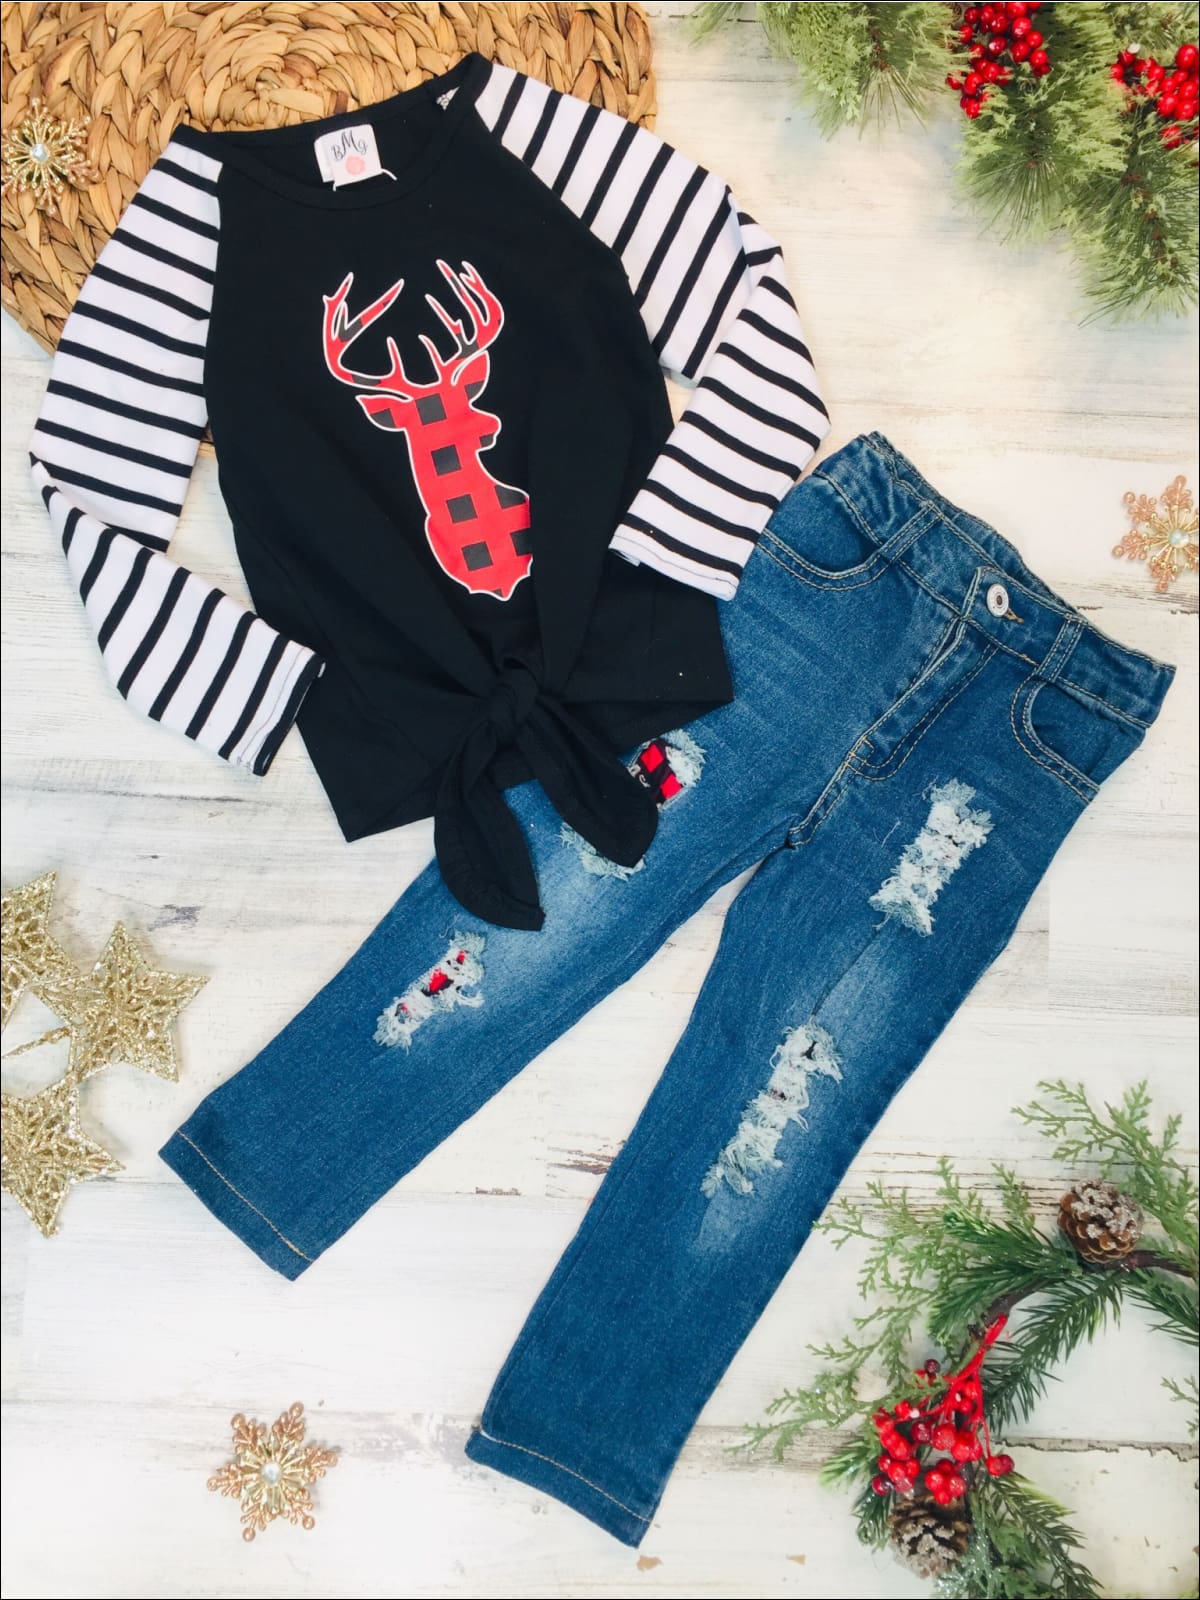 Girls Striped Sleeve Plaid Reindeer Knot Top & Ripped Jeans Set - Black / 3T - Girls Christmas Set